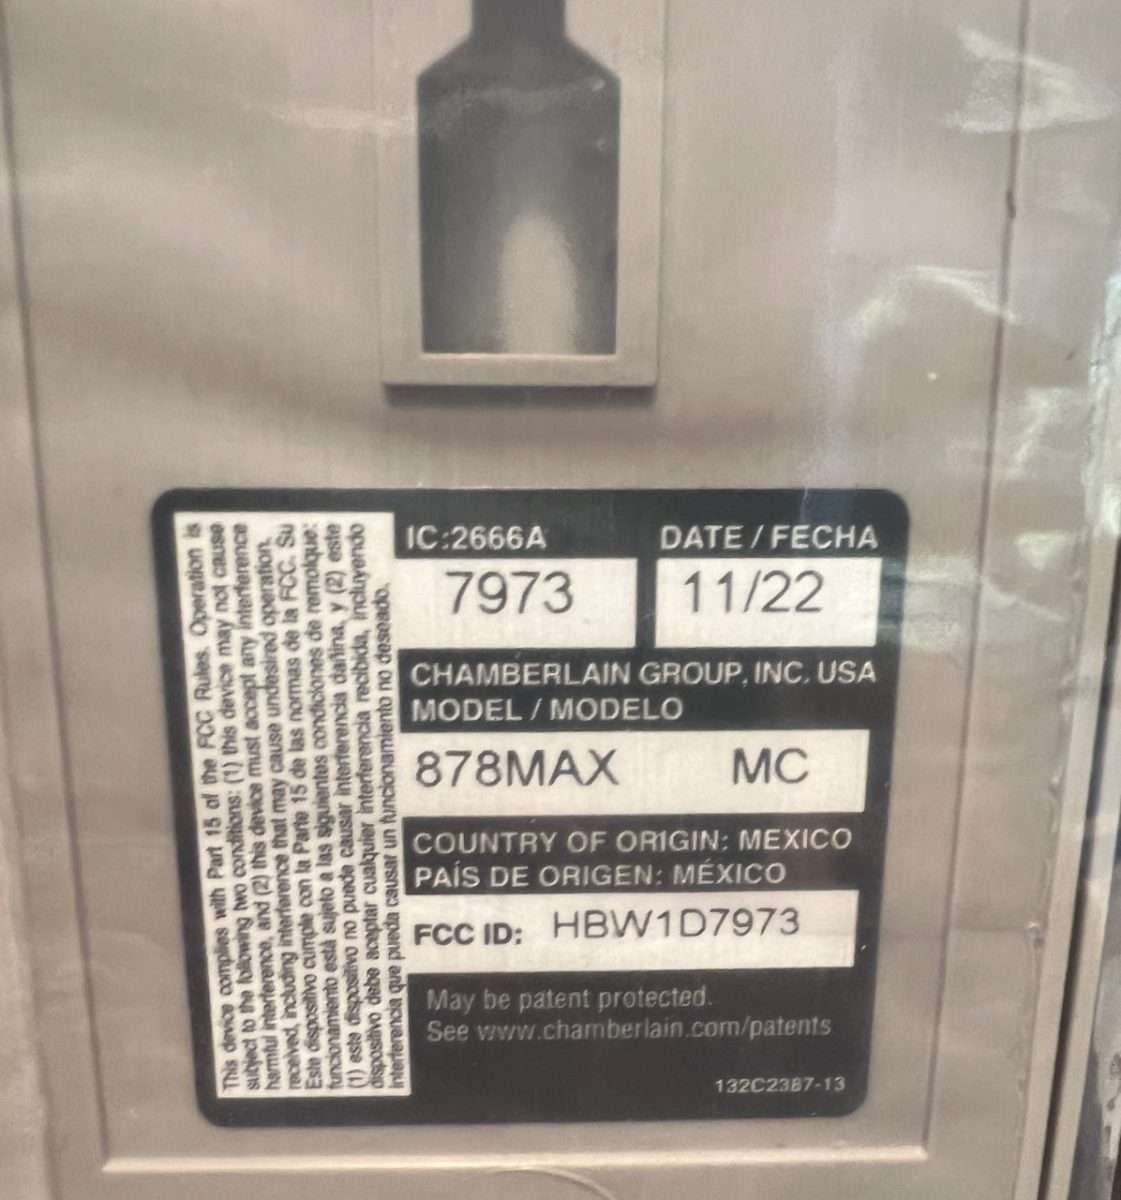 Back of LiftMaster 878MAX keypad which shows the date and model of the remote.